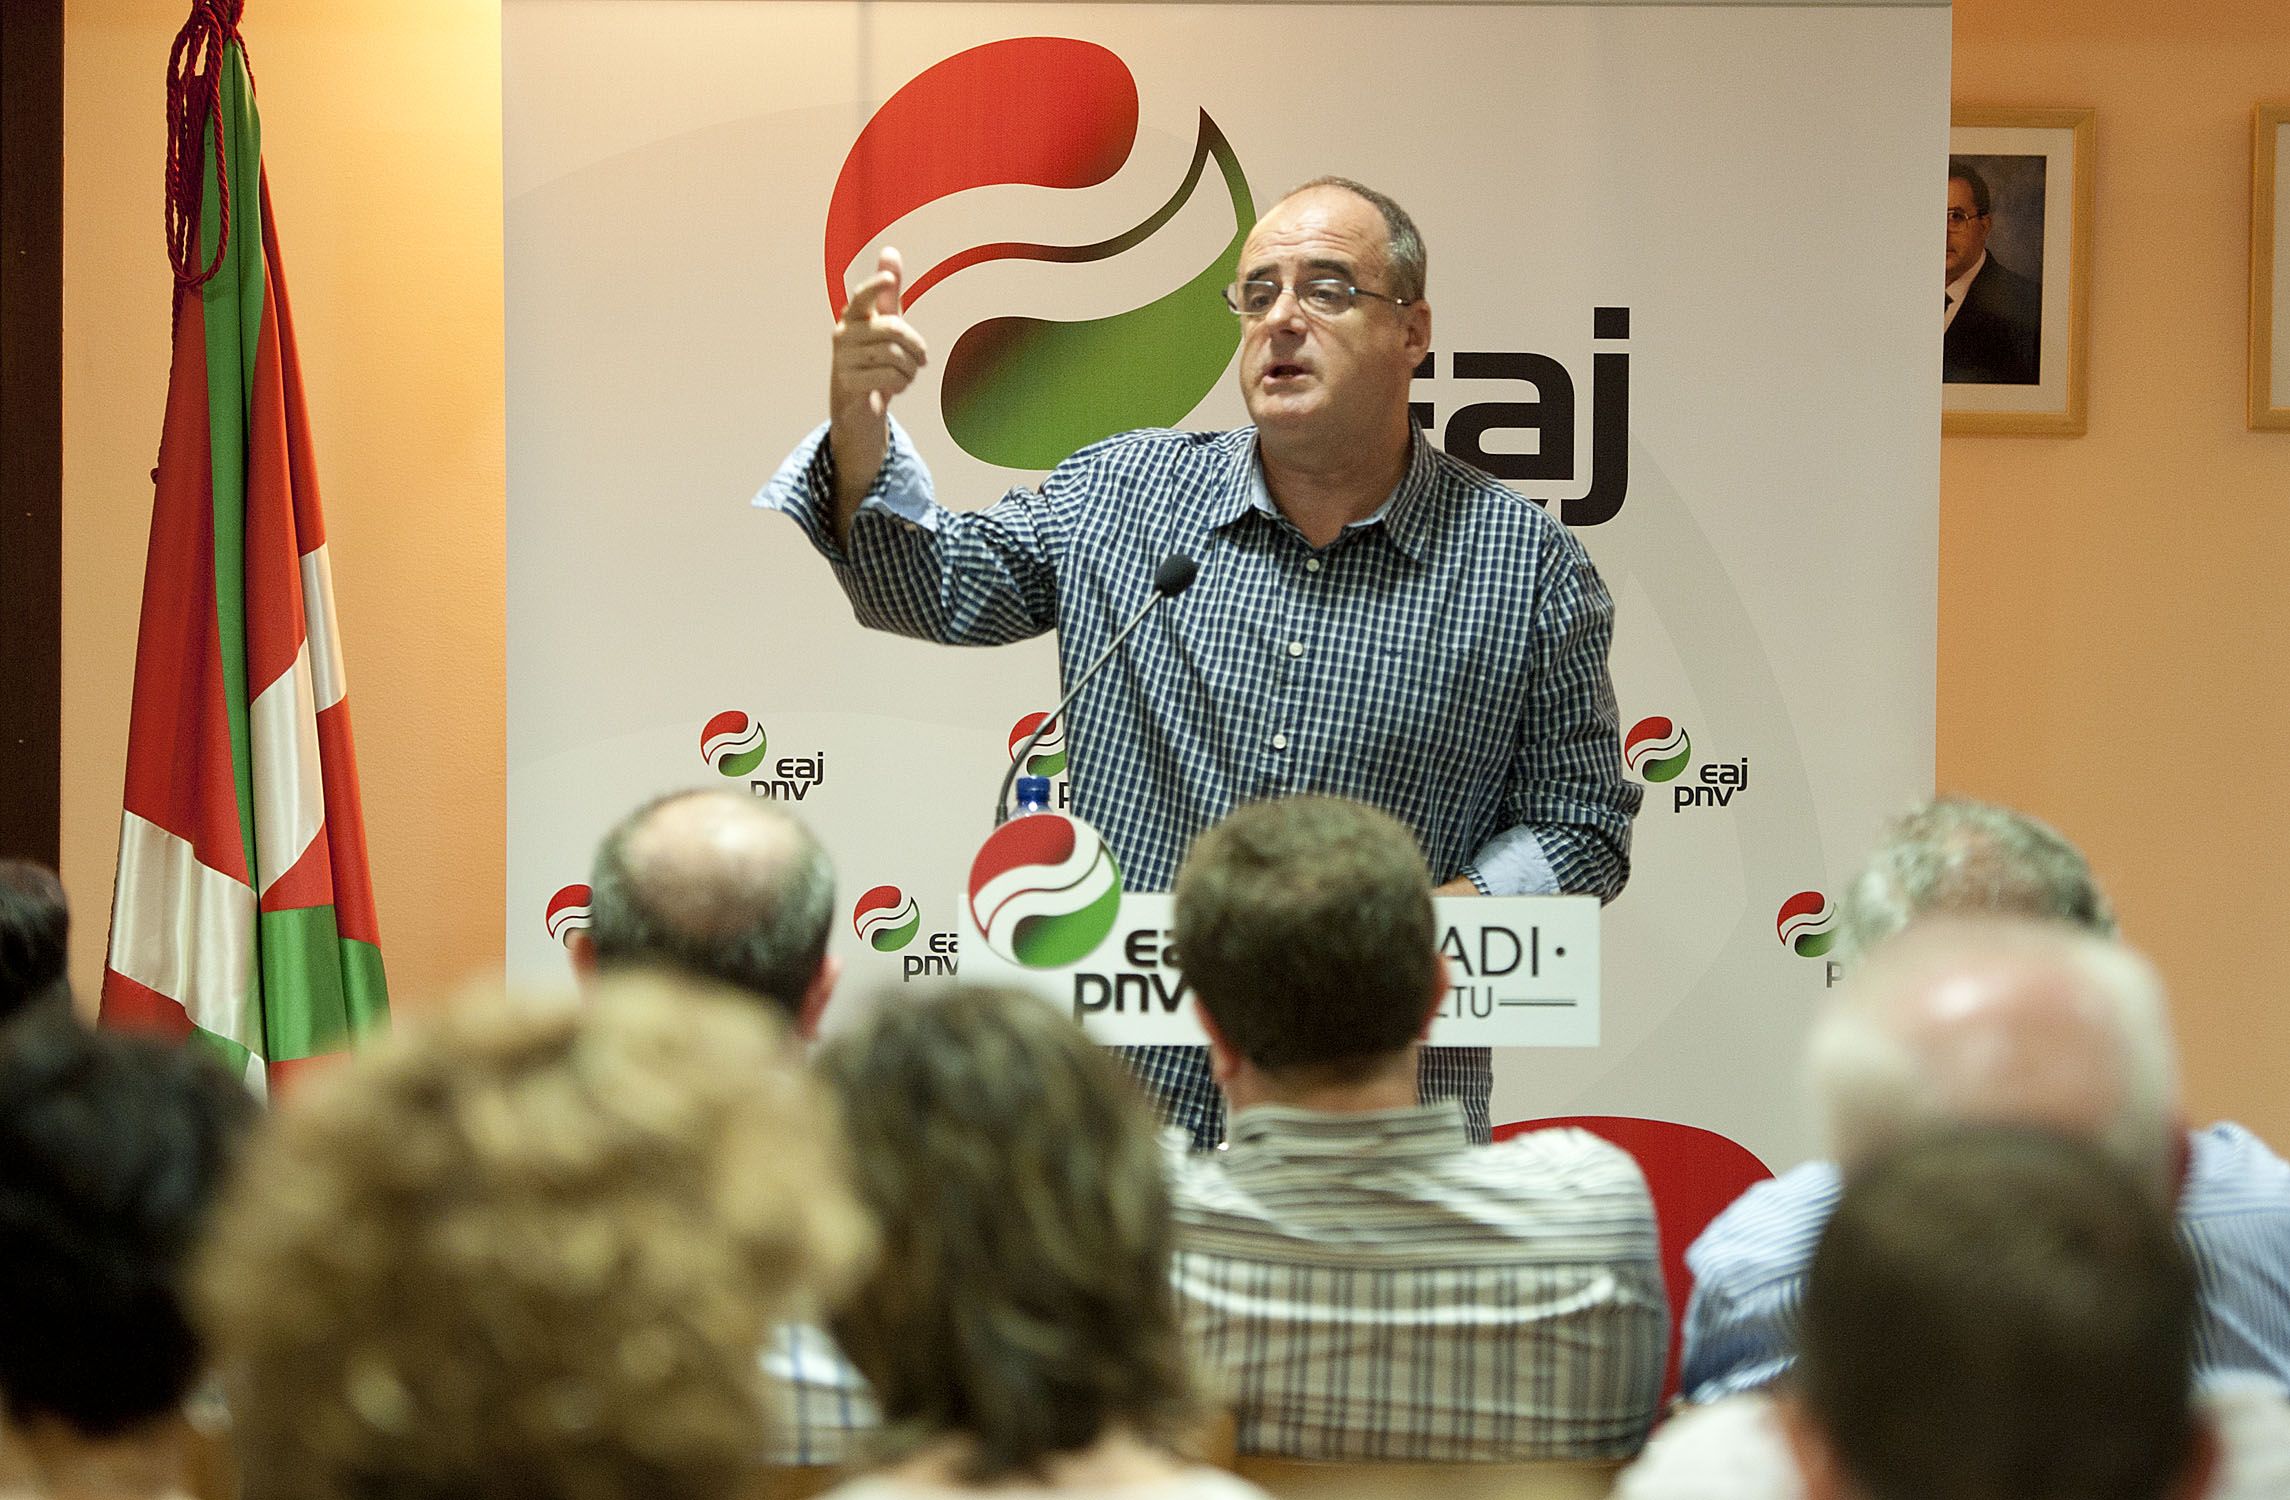 Basque Nationalist Party puts Rajoy's budget at risk for lack of "democratic decency"